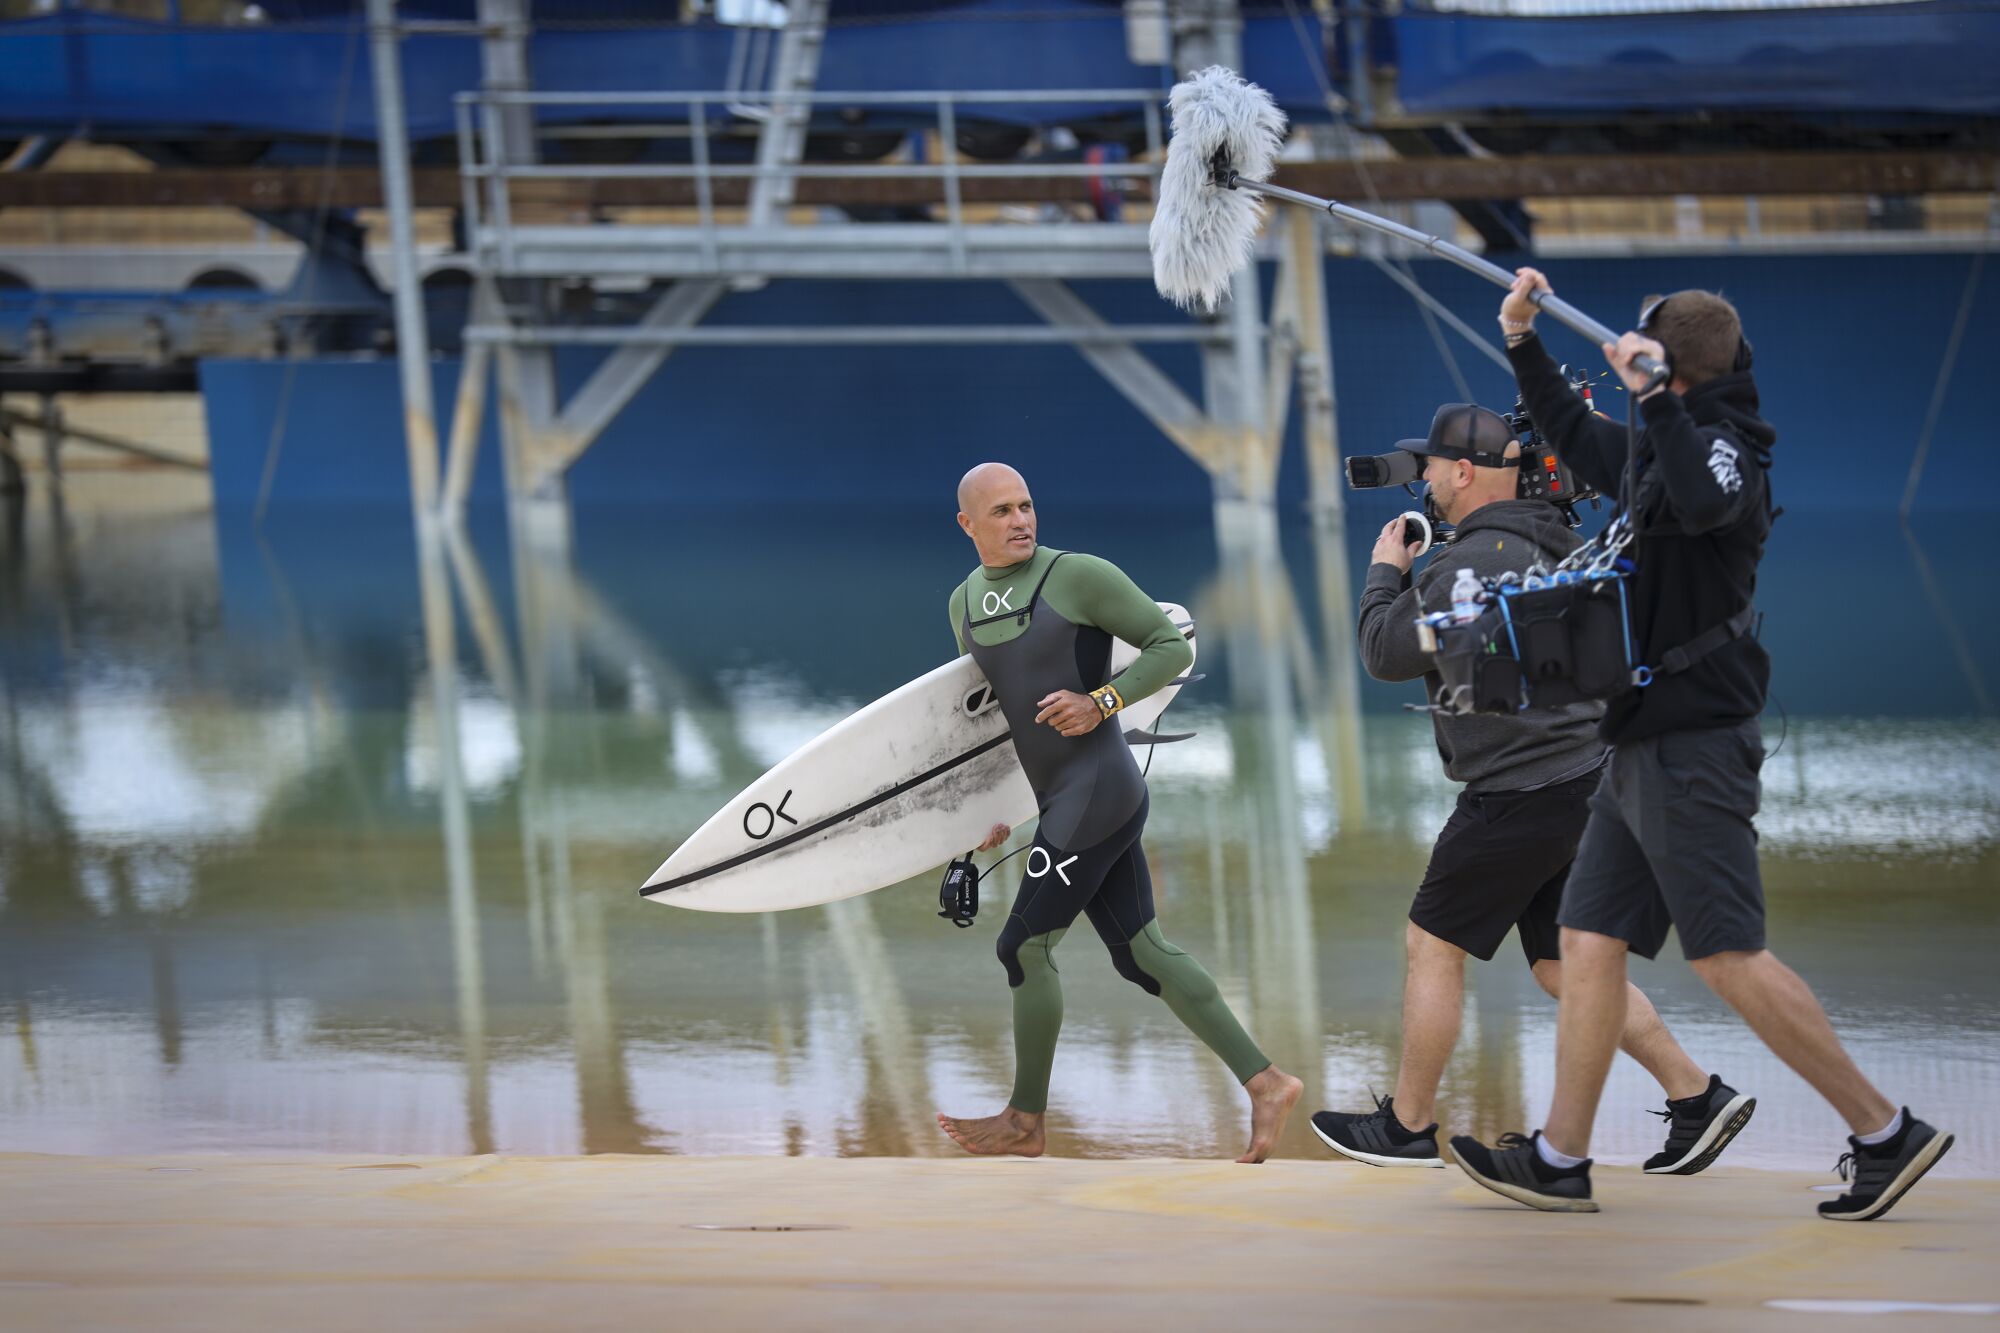 Kelly Slater runs with surfboard in hand as a camera crew follows